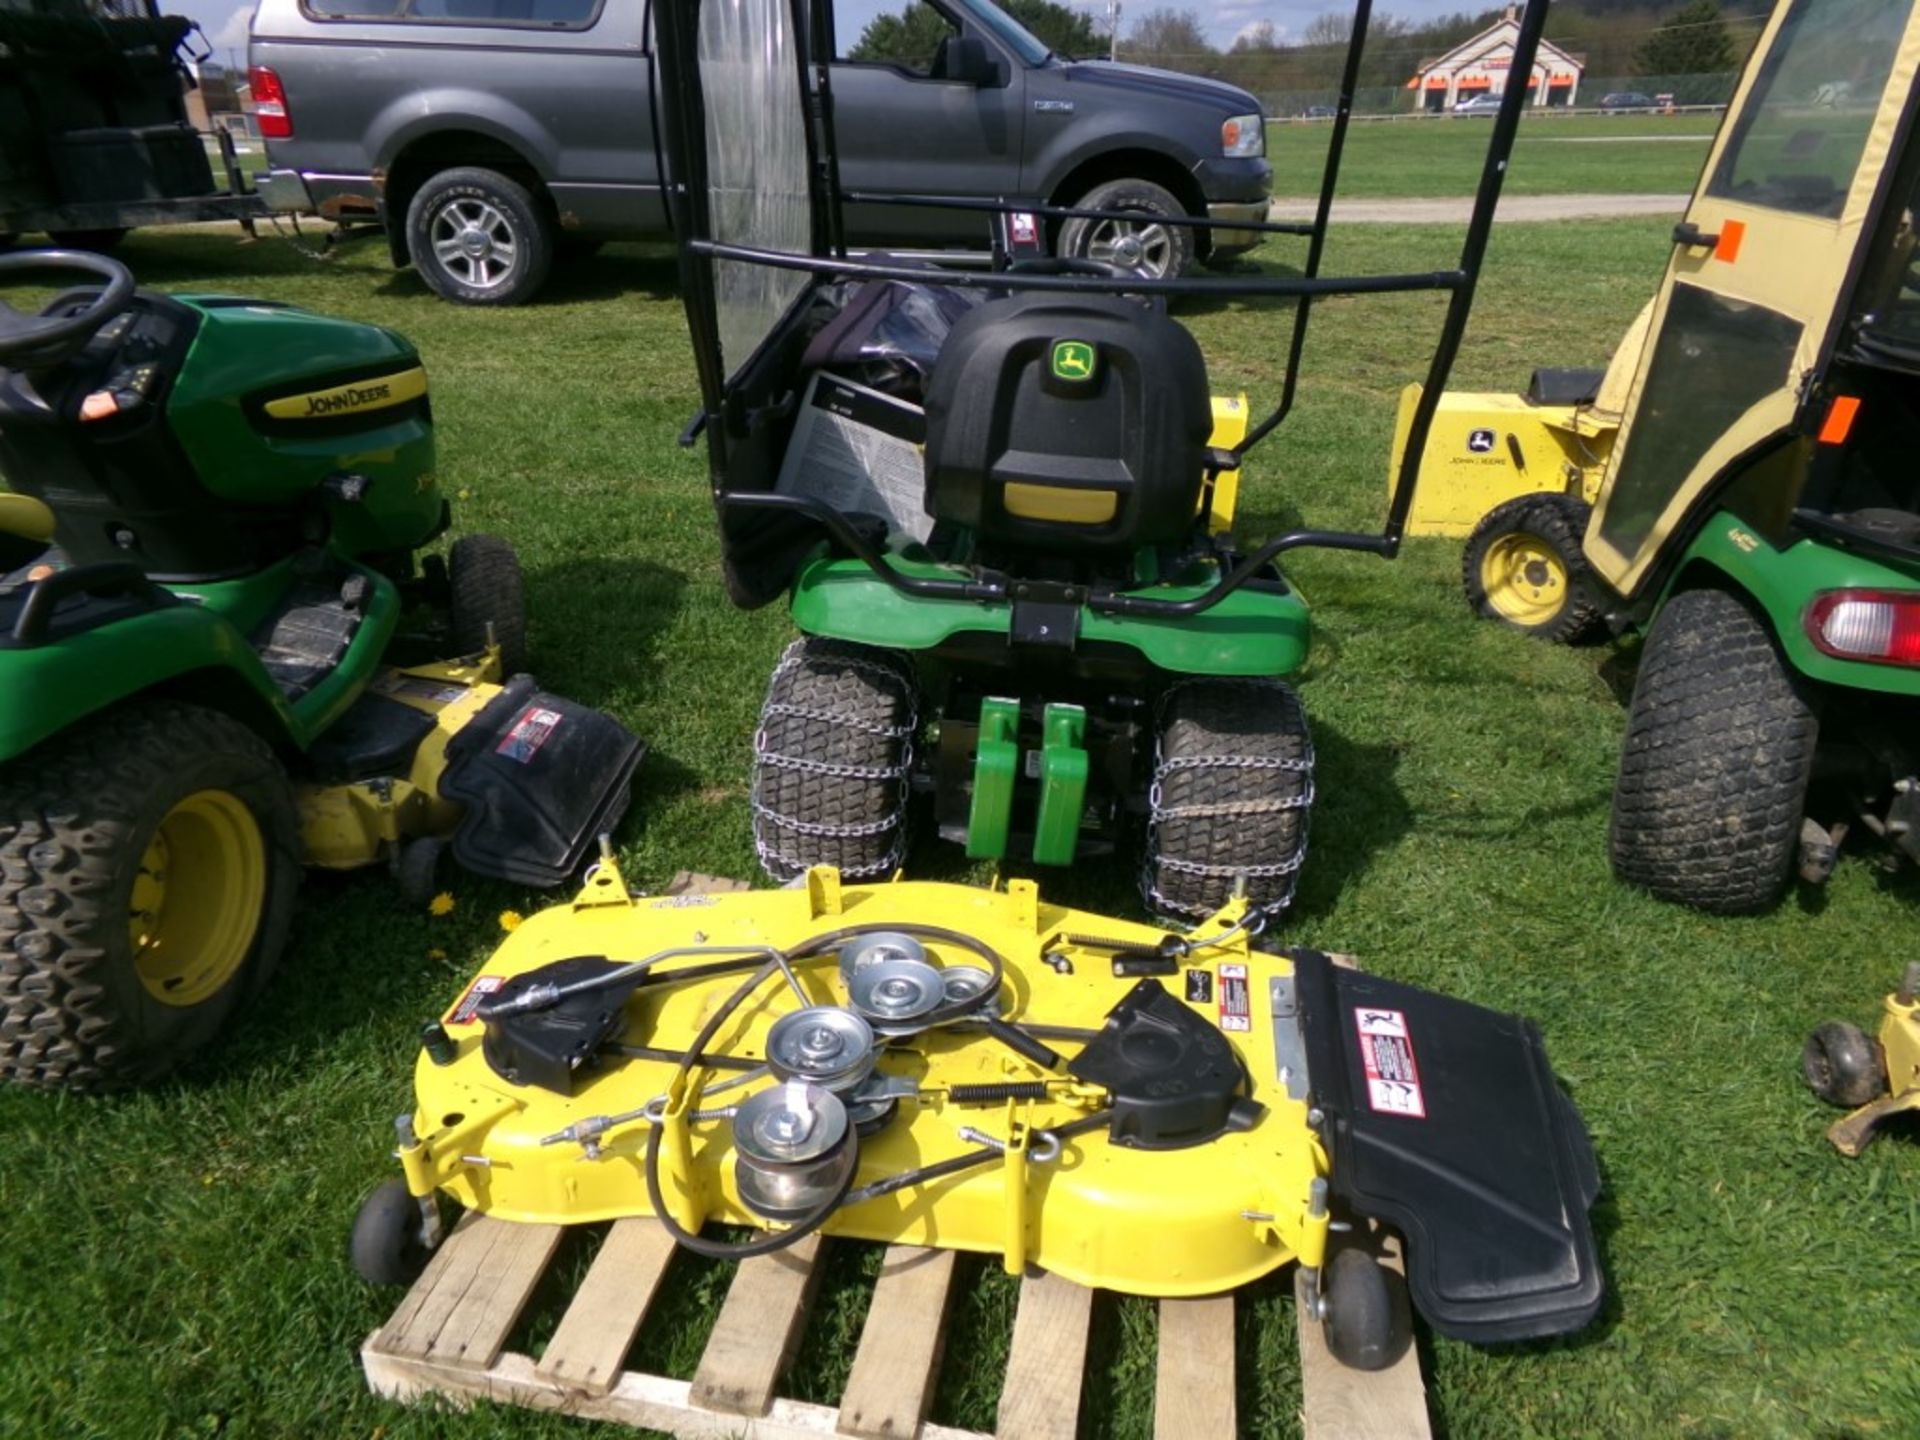 John Deere X350 44'' Snow Blower with Soft Cab, 18 HP with 48'' Deck, Chains and Weights, 225 Hrs. - Image 3 of 3